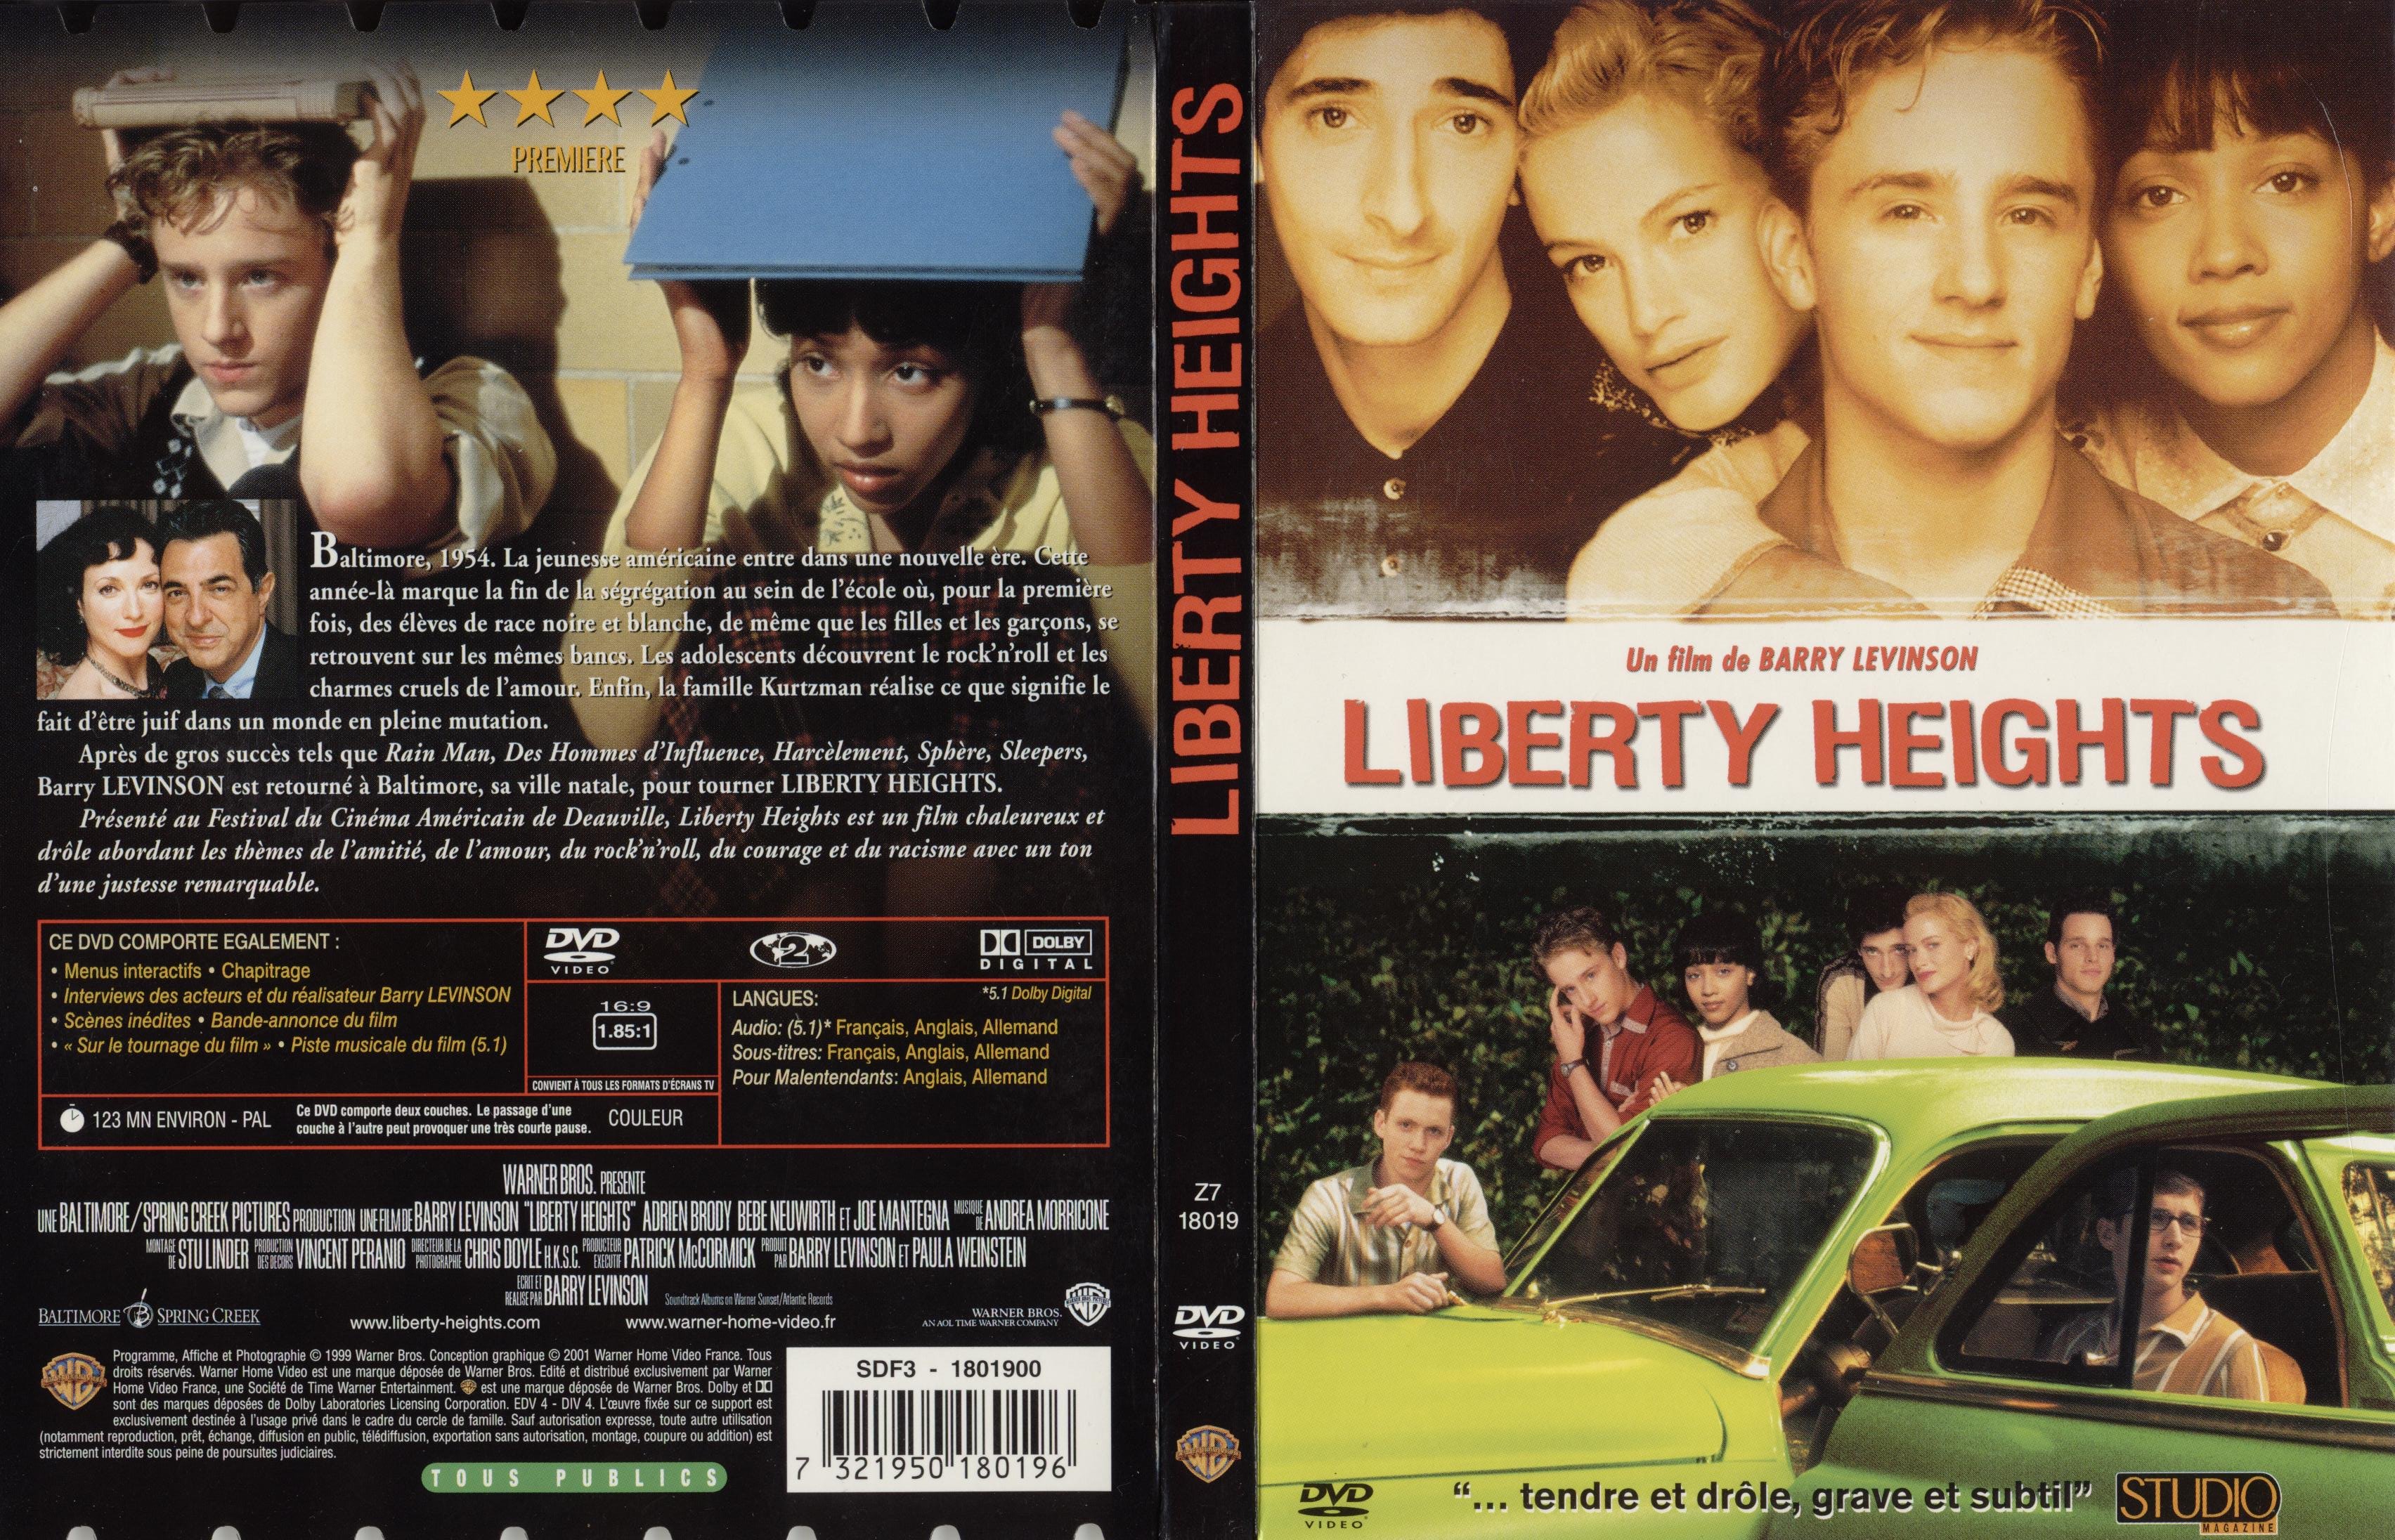 Jaquette DVD Liberty heights